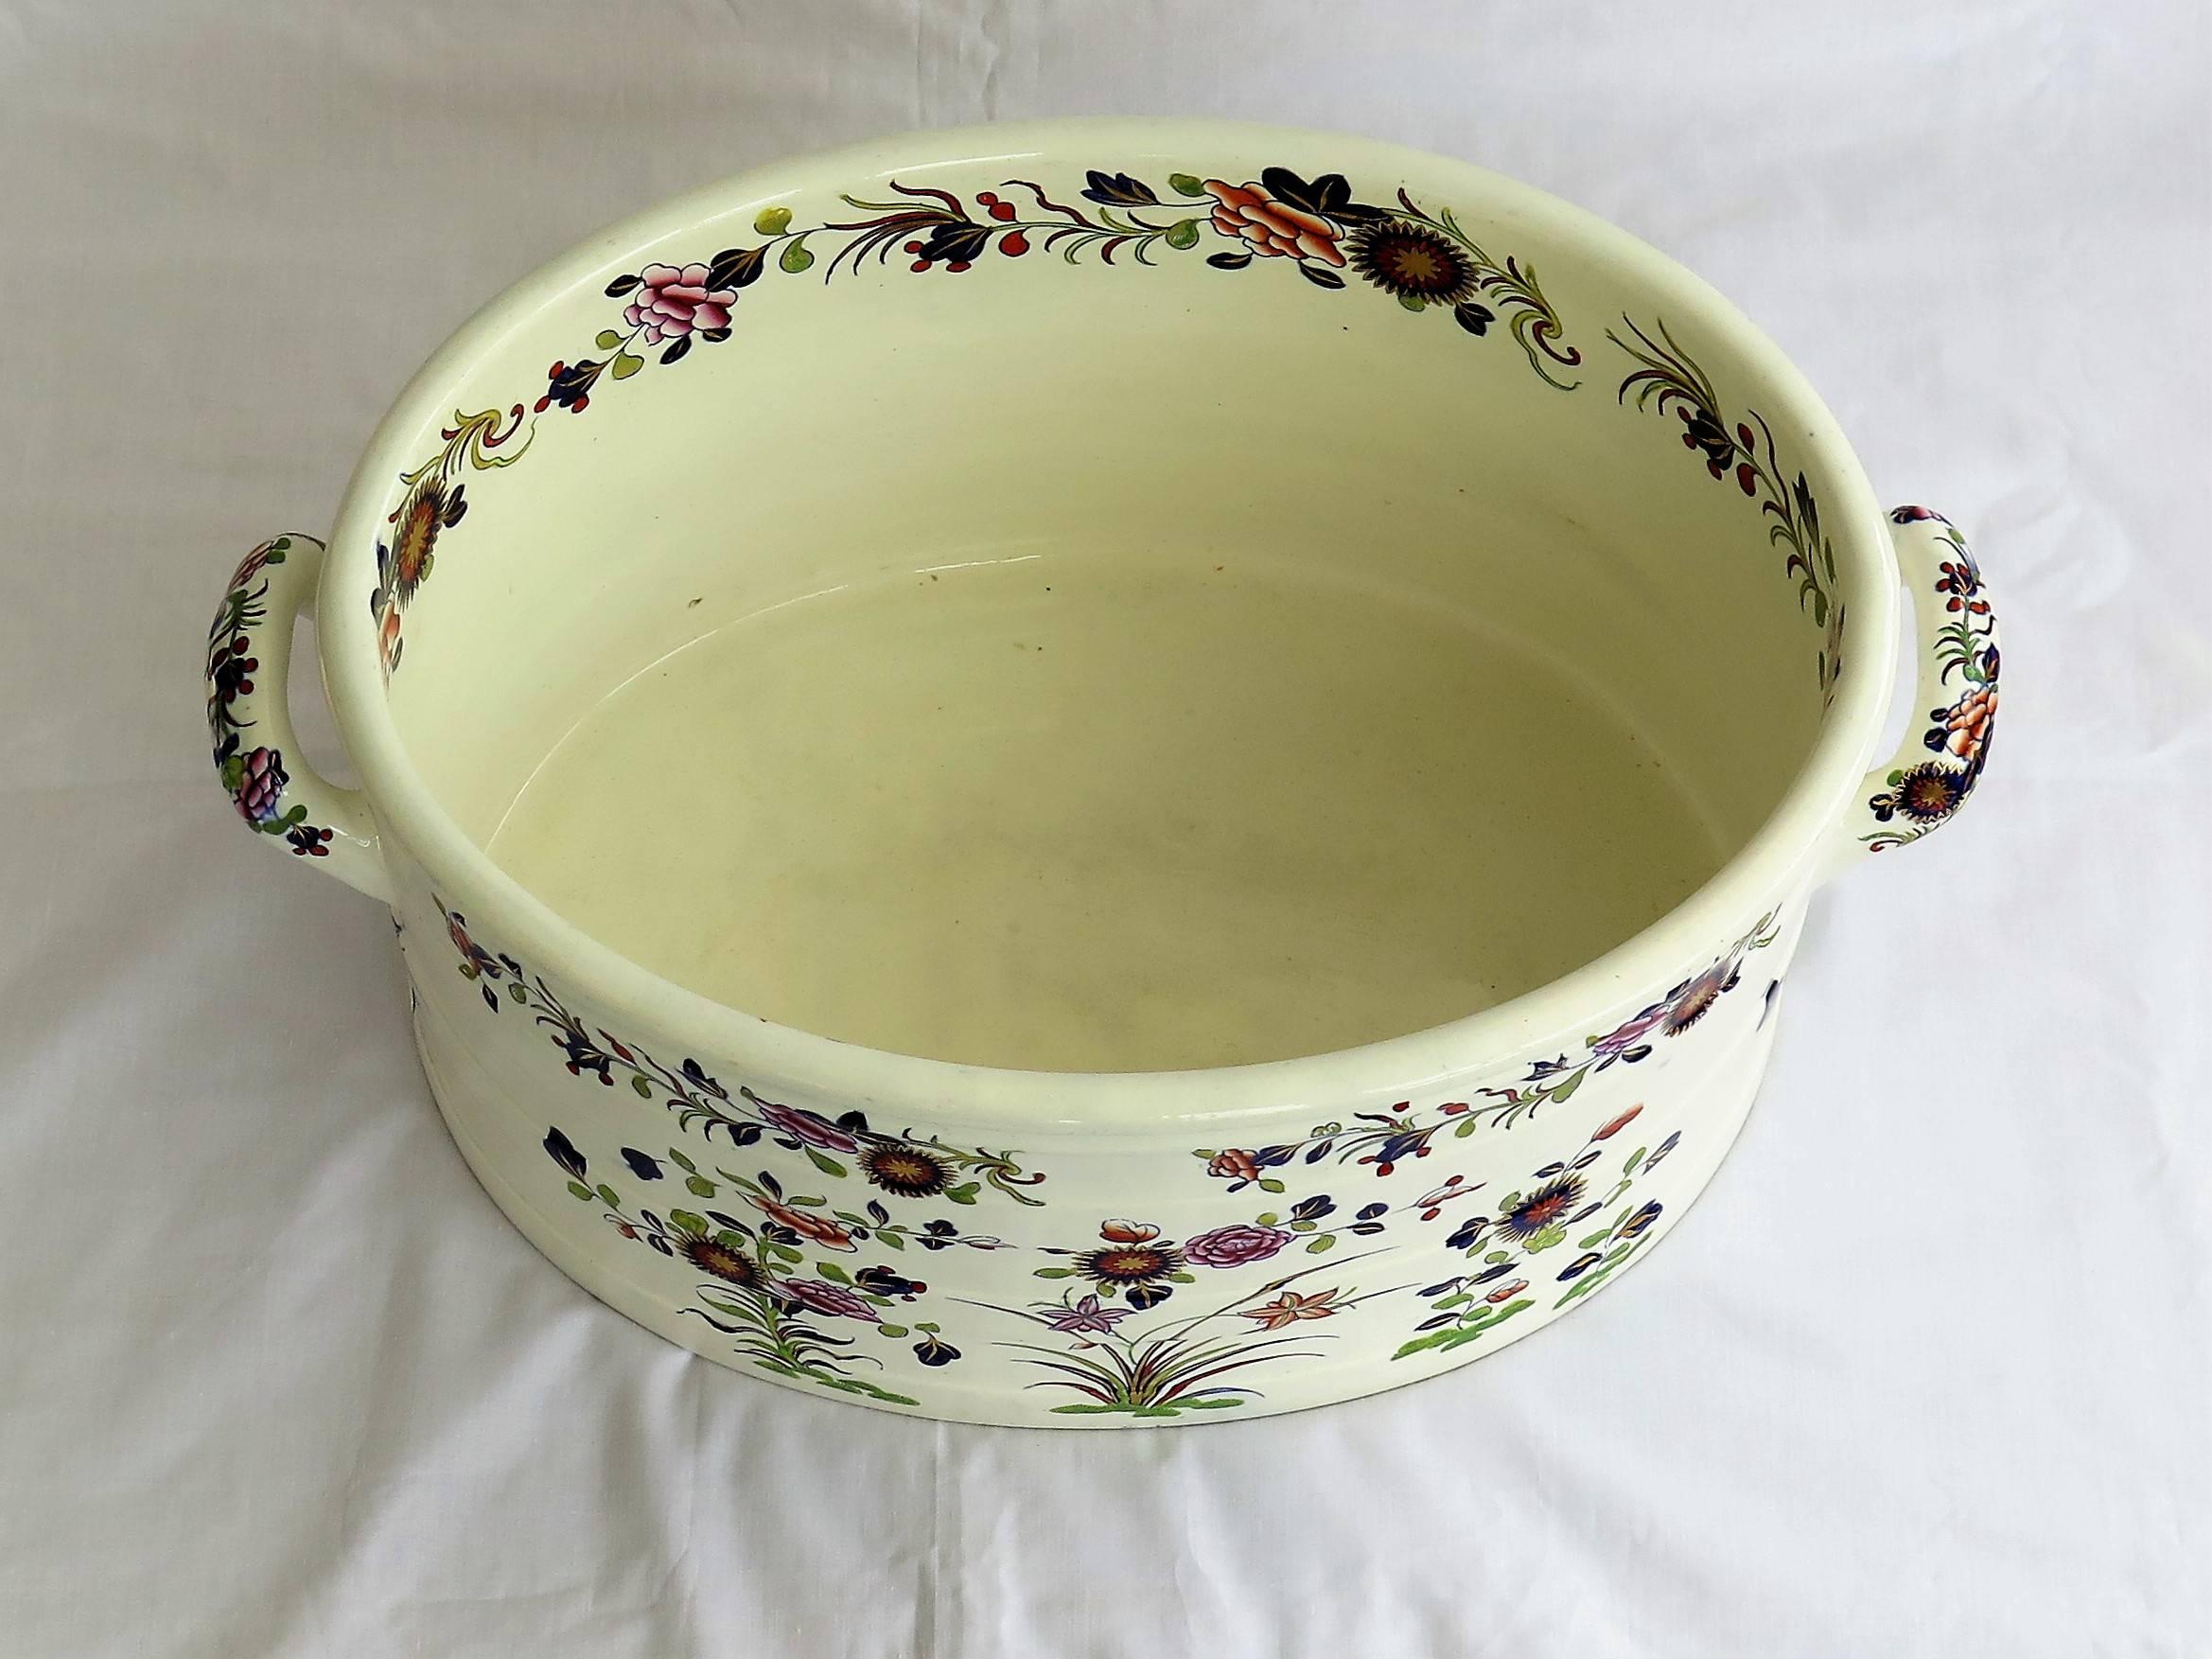 Hand-Painted Very Rare Spode Foot Bath Earthenware Chinese Flowers Pattern 2963, Circa 1820